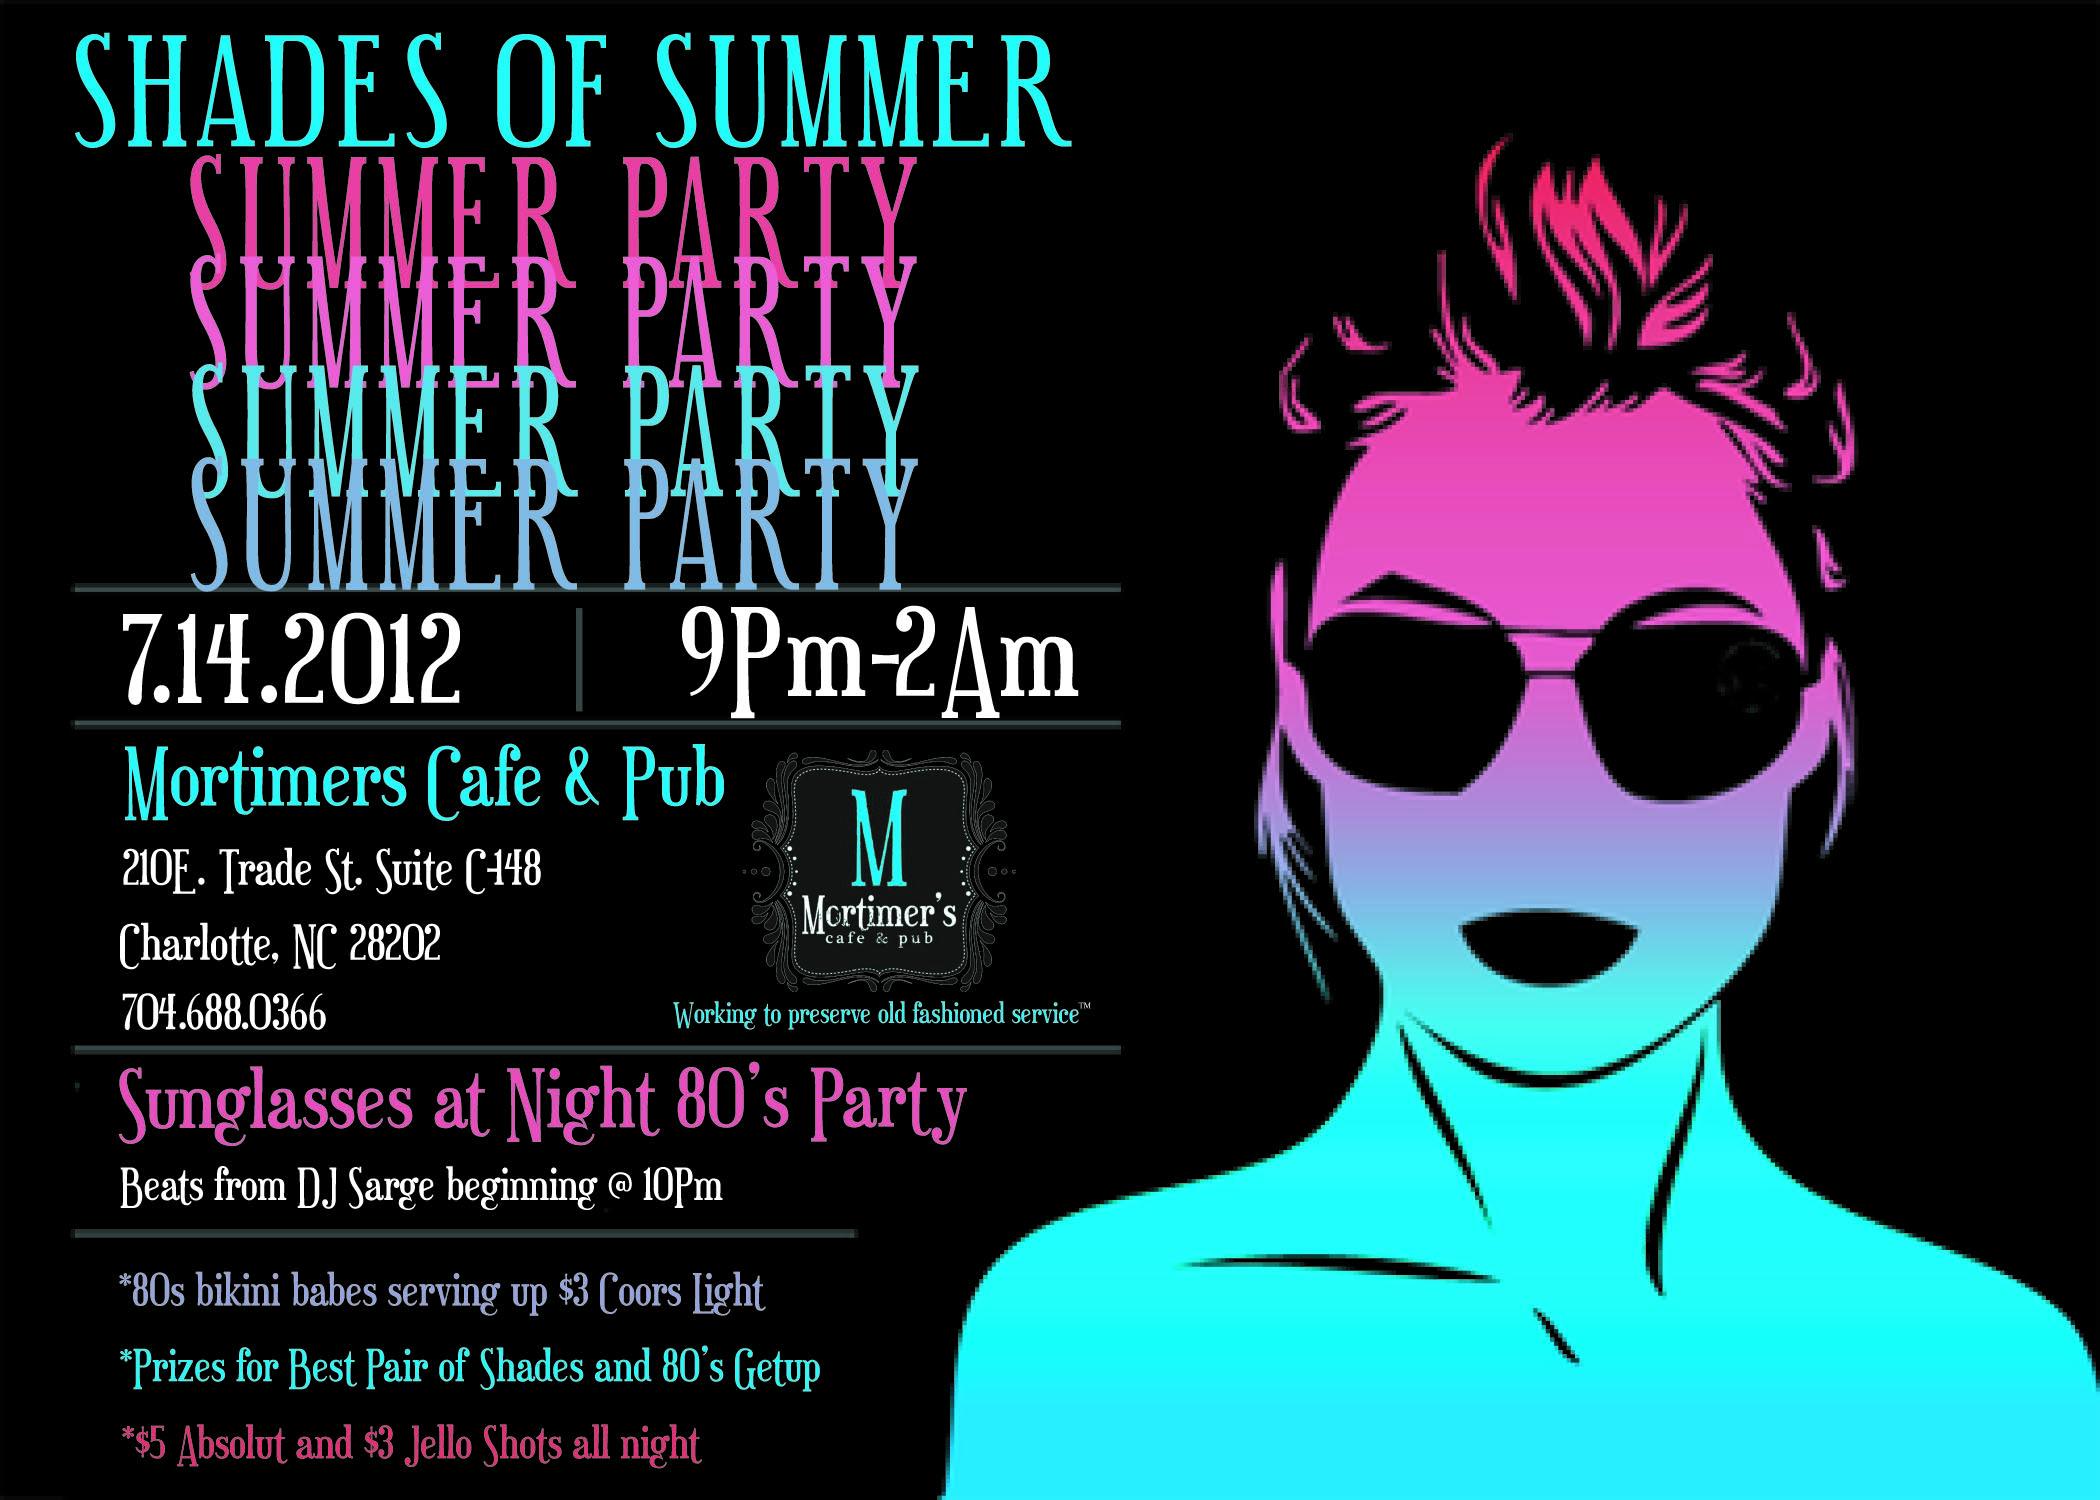 Shades of Summer- A Sunglasses at Night 80’s Party!